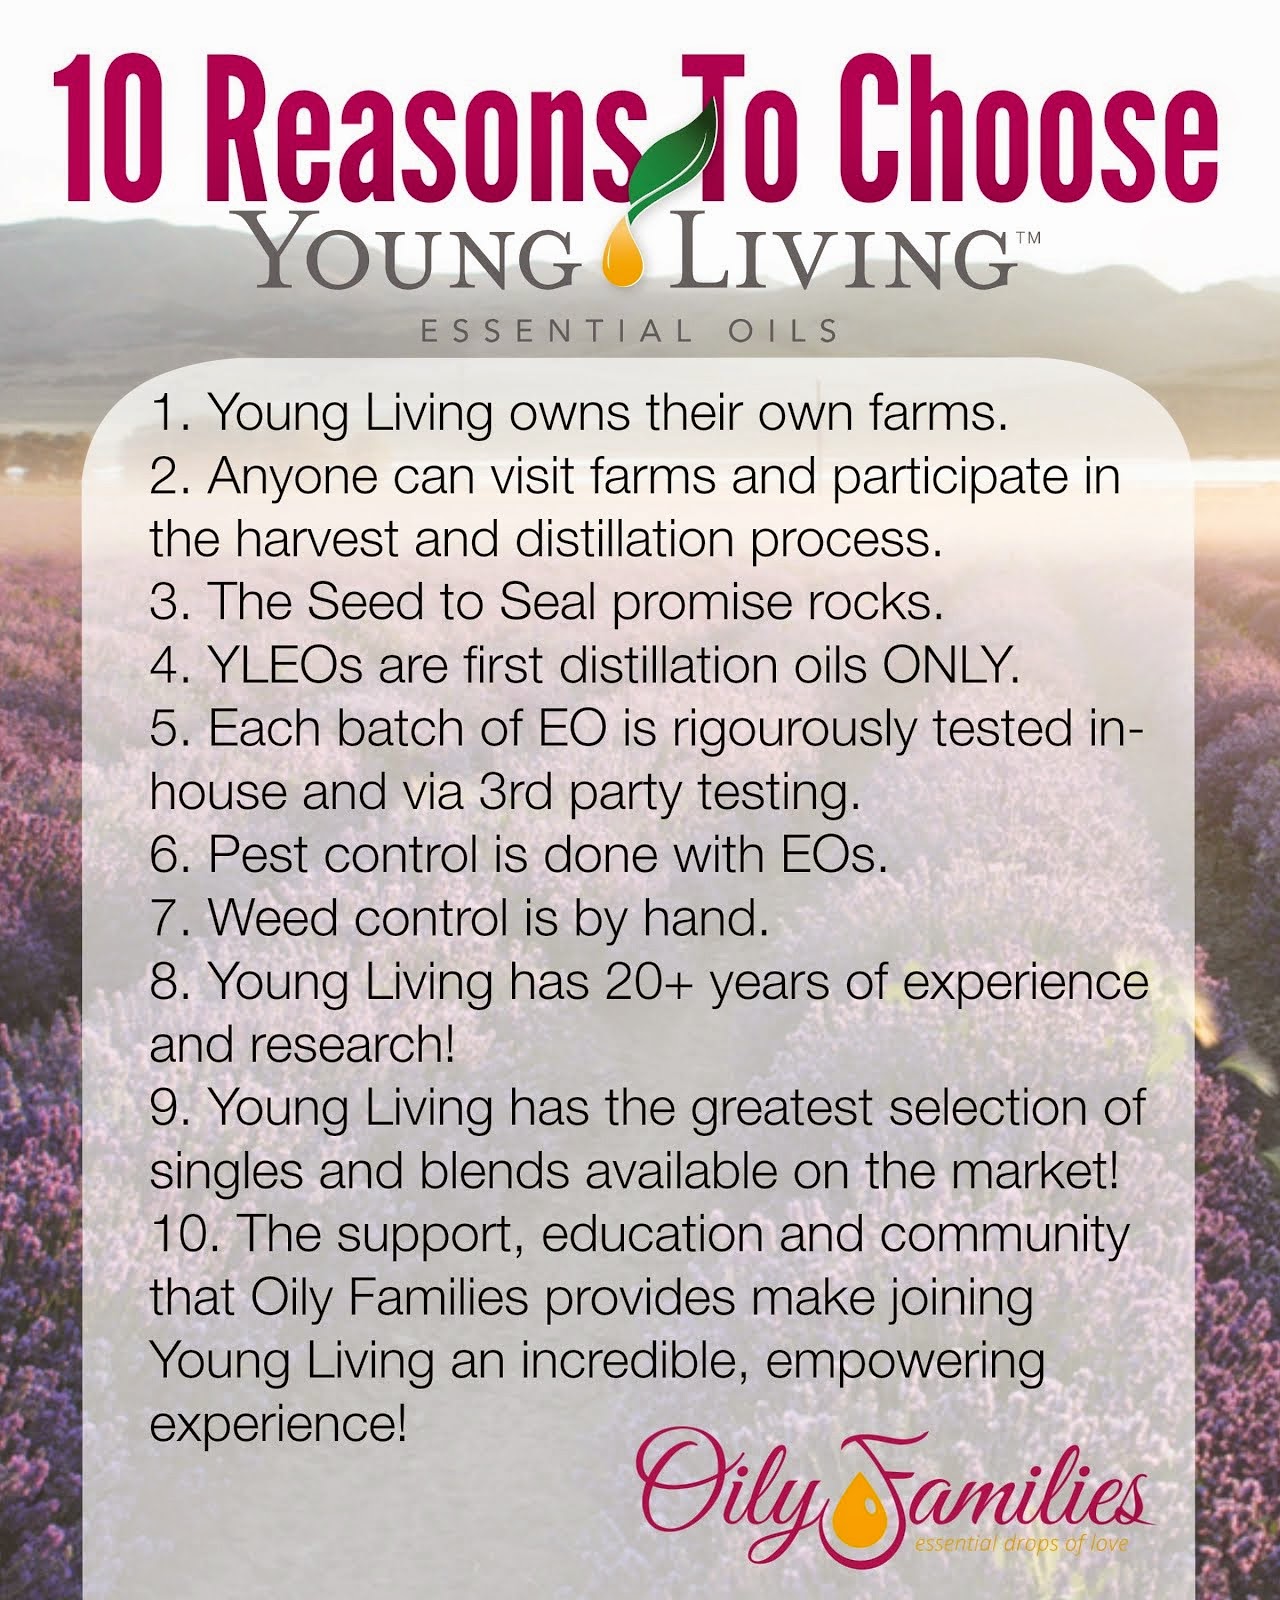 10 Reasons to Choose Young Living